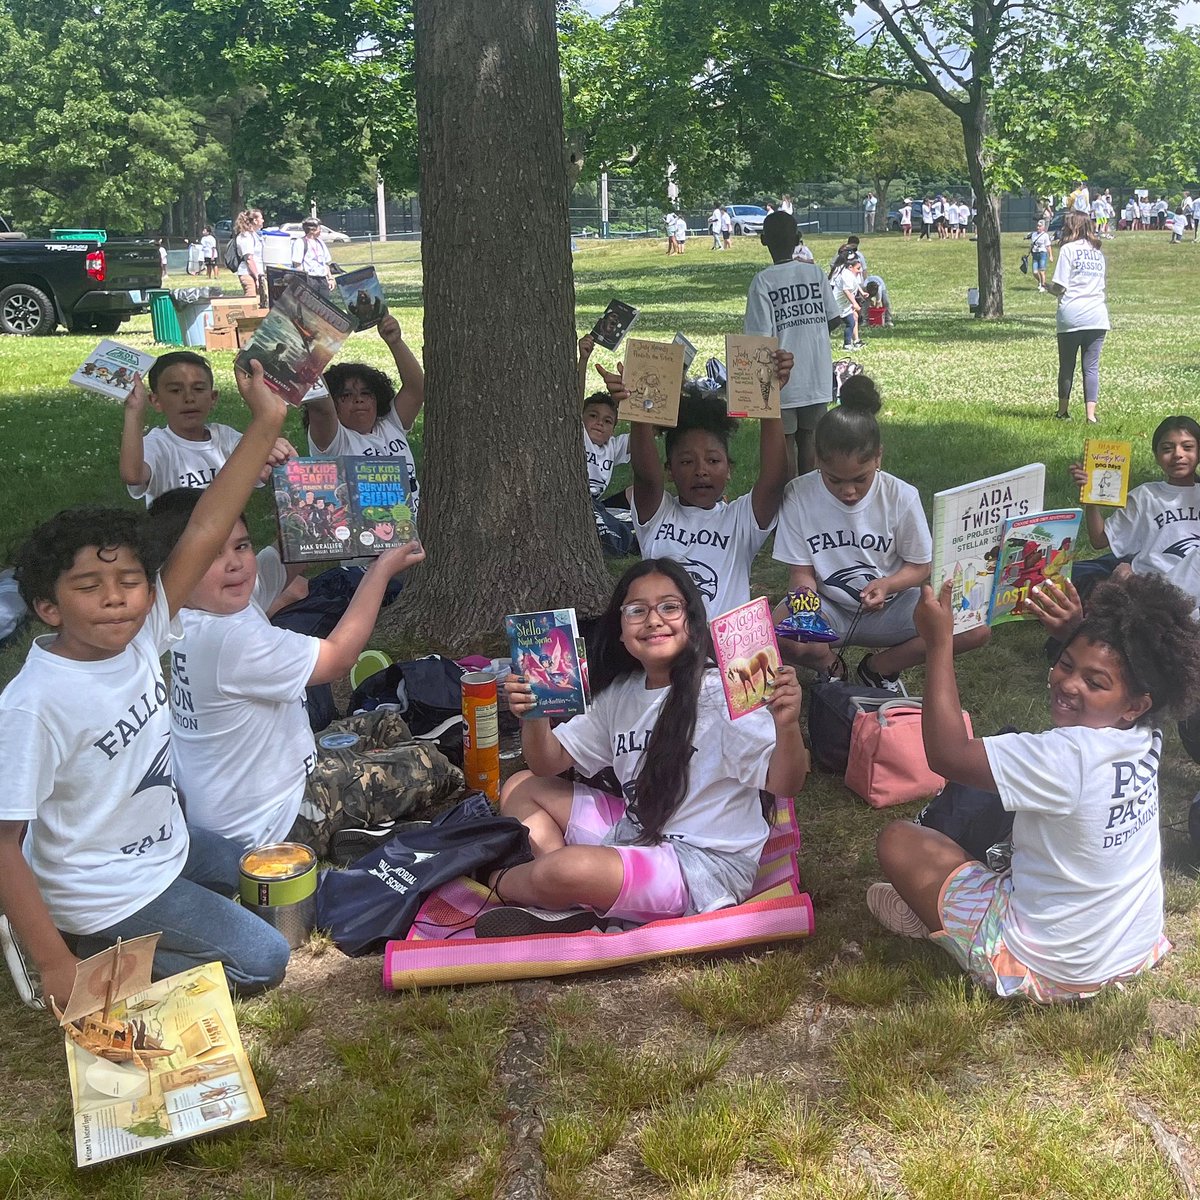 We had so much fun at Fallon Elementary in Pawtucket celebrating the close of the school year! We made sure students had books to help prevent #summerlearningloss. Our summer programs are picking up now that the school year has ended - look out for the book van in your community!